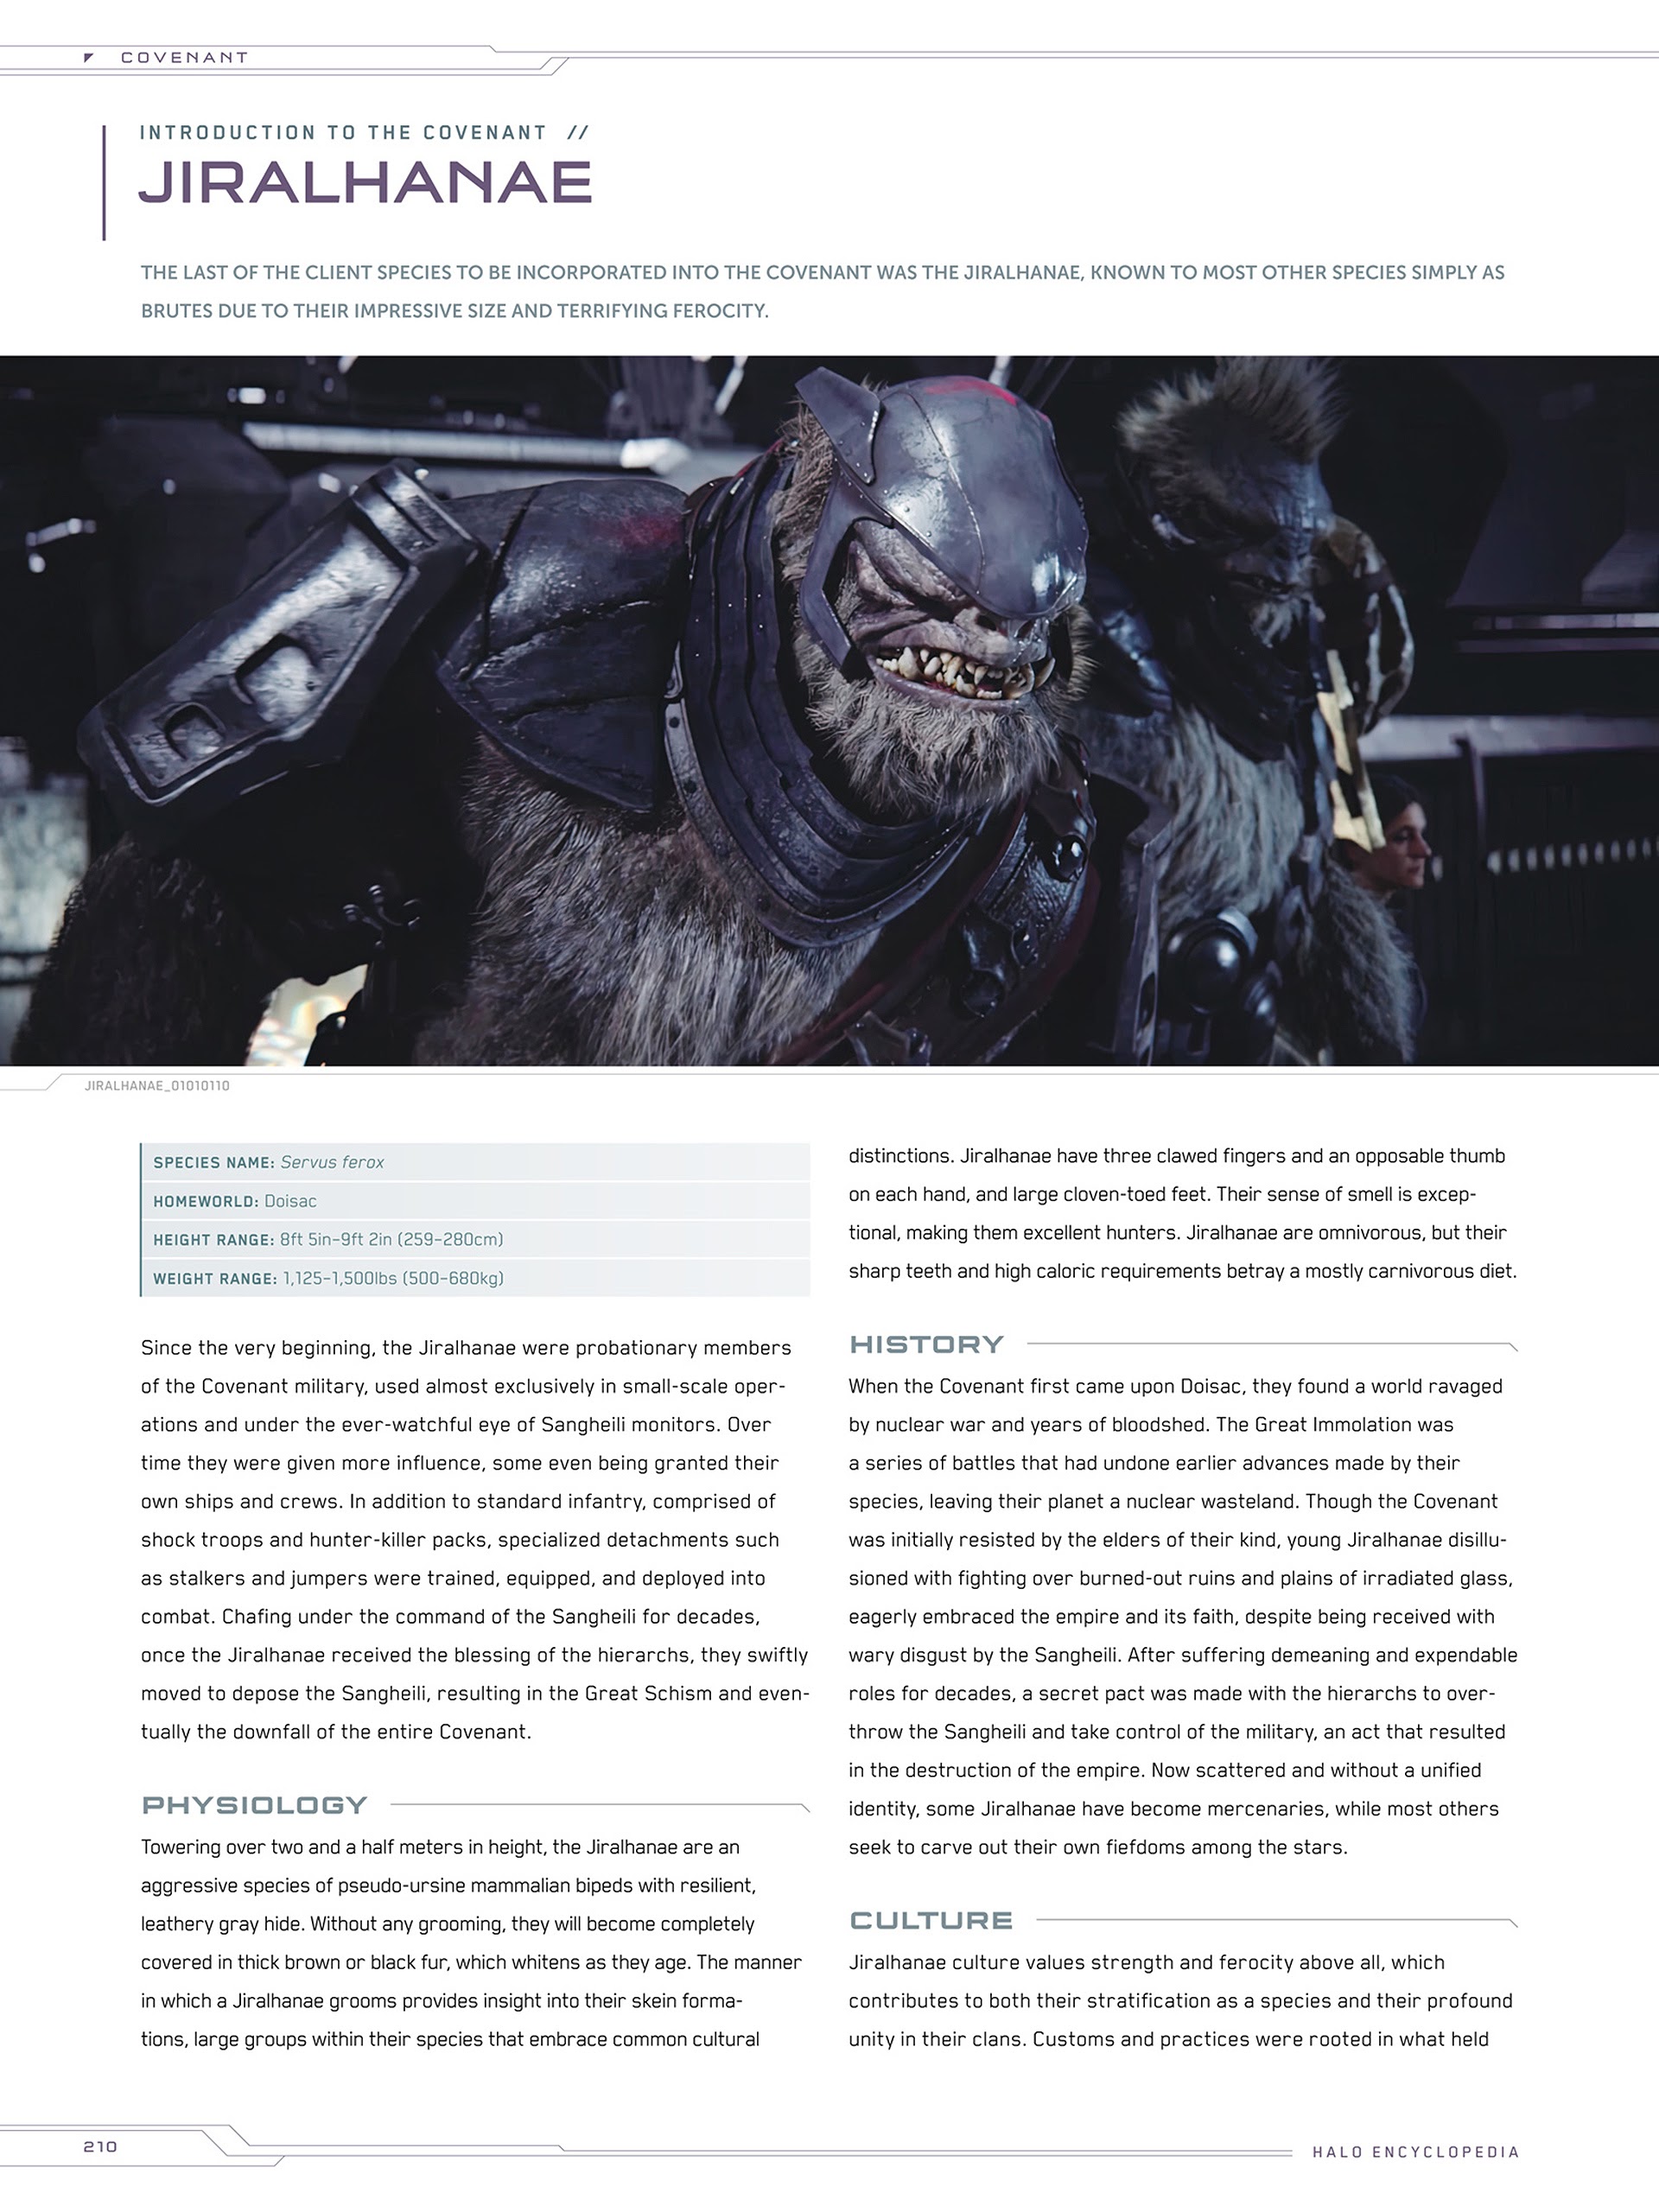 Read online Halo Encyclopedia comic -  Issue # TPB (Part 3) - 6